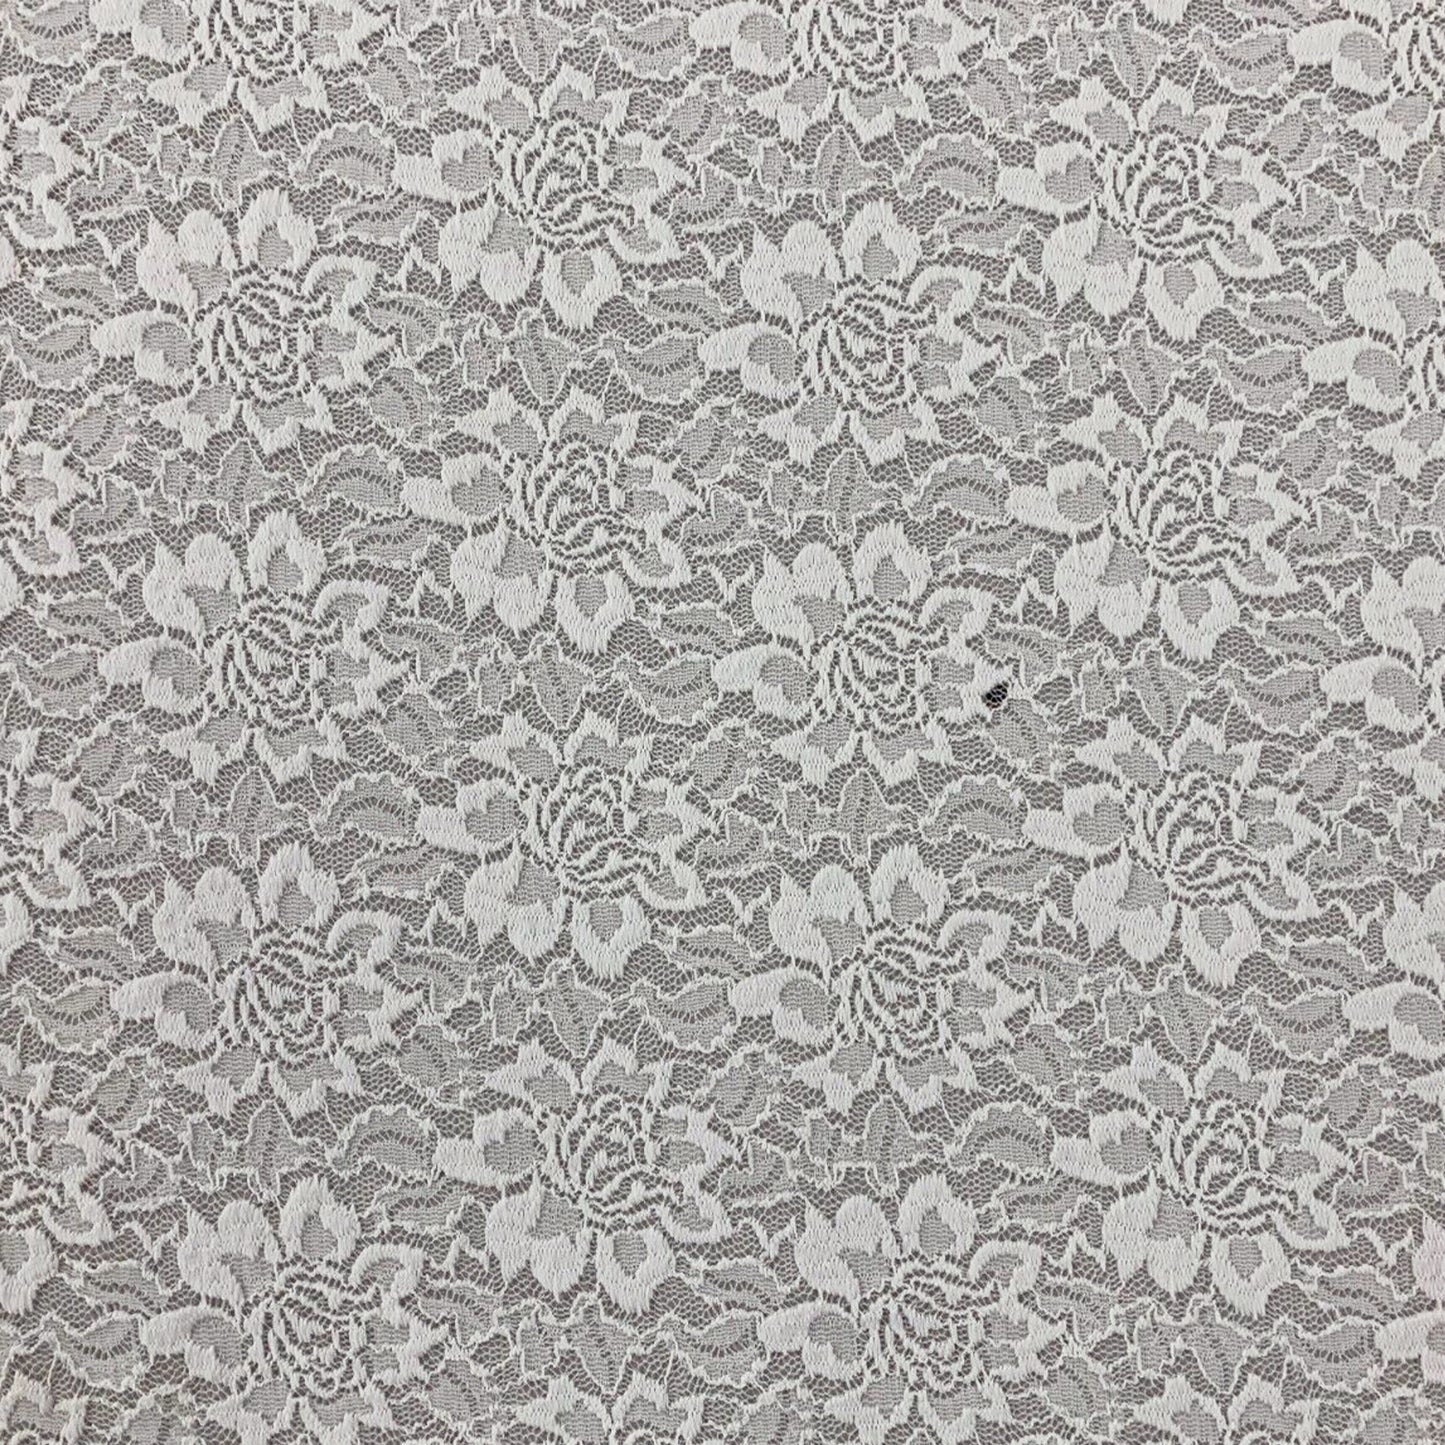 Ivory white floral stretch lace fabric for sewing and clothing projects shown on a black base to show off the flowers 